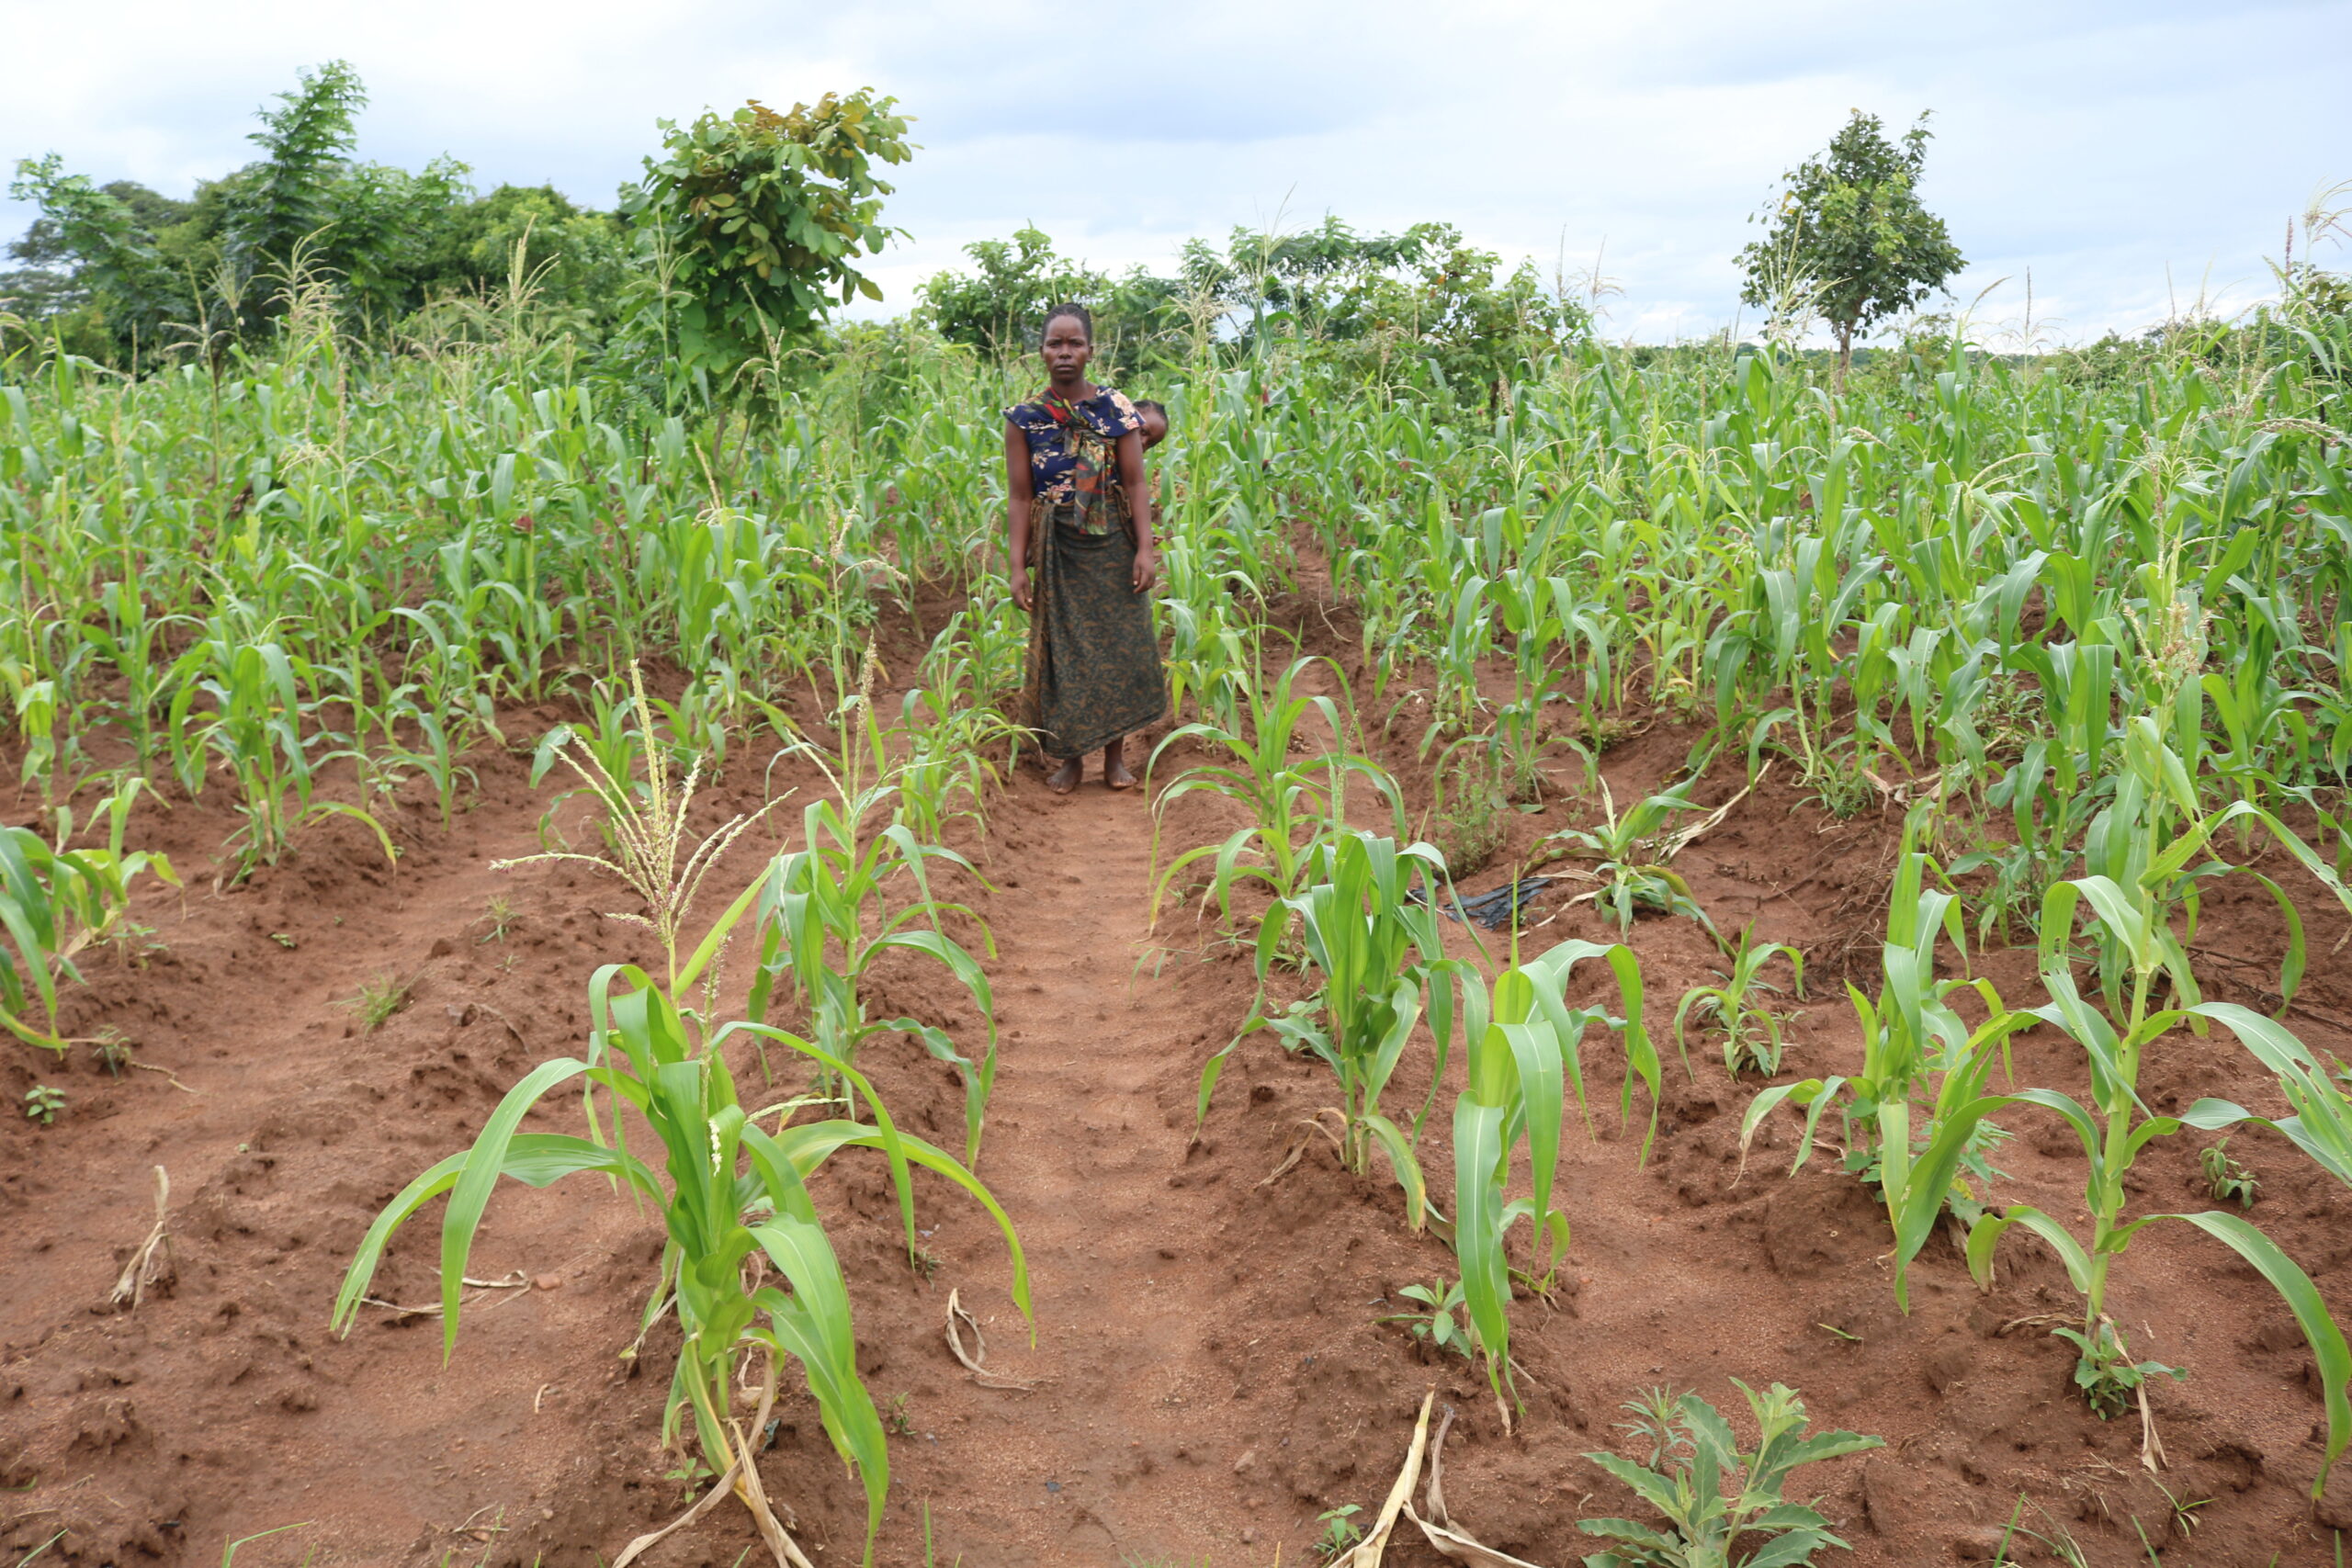 The Life of a Subsistence Farmer in Rural Malawi